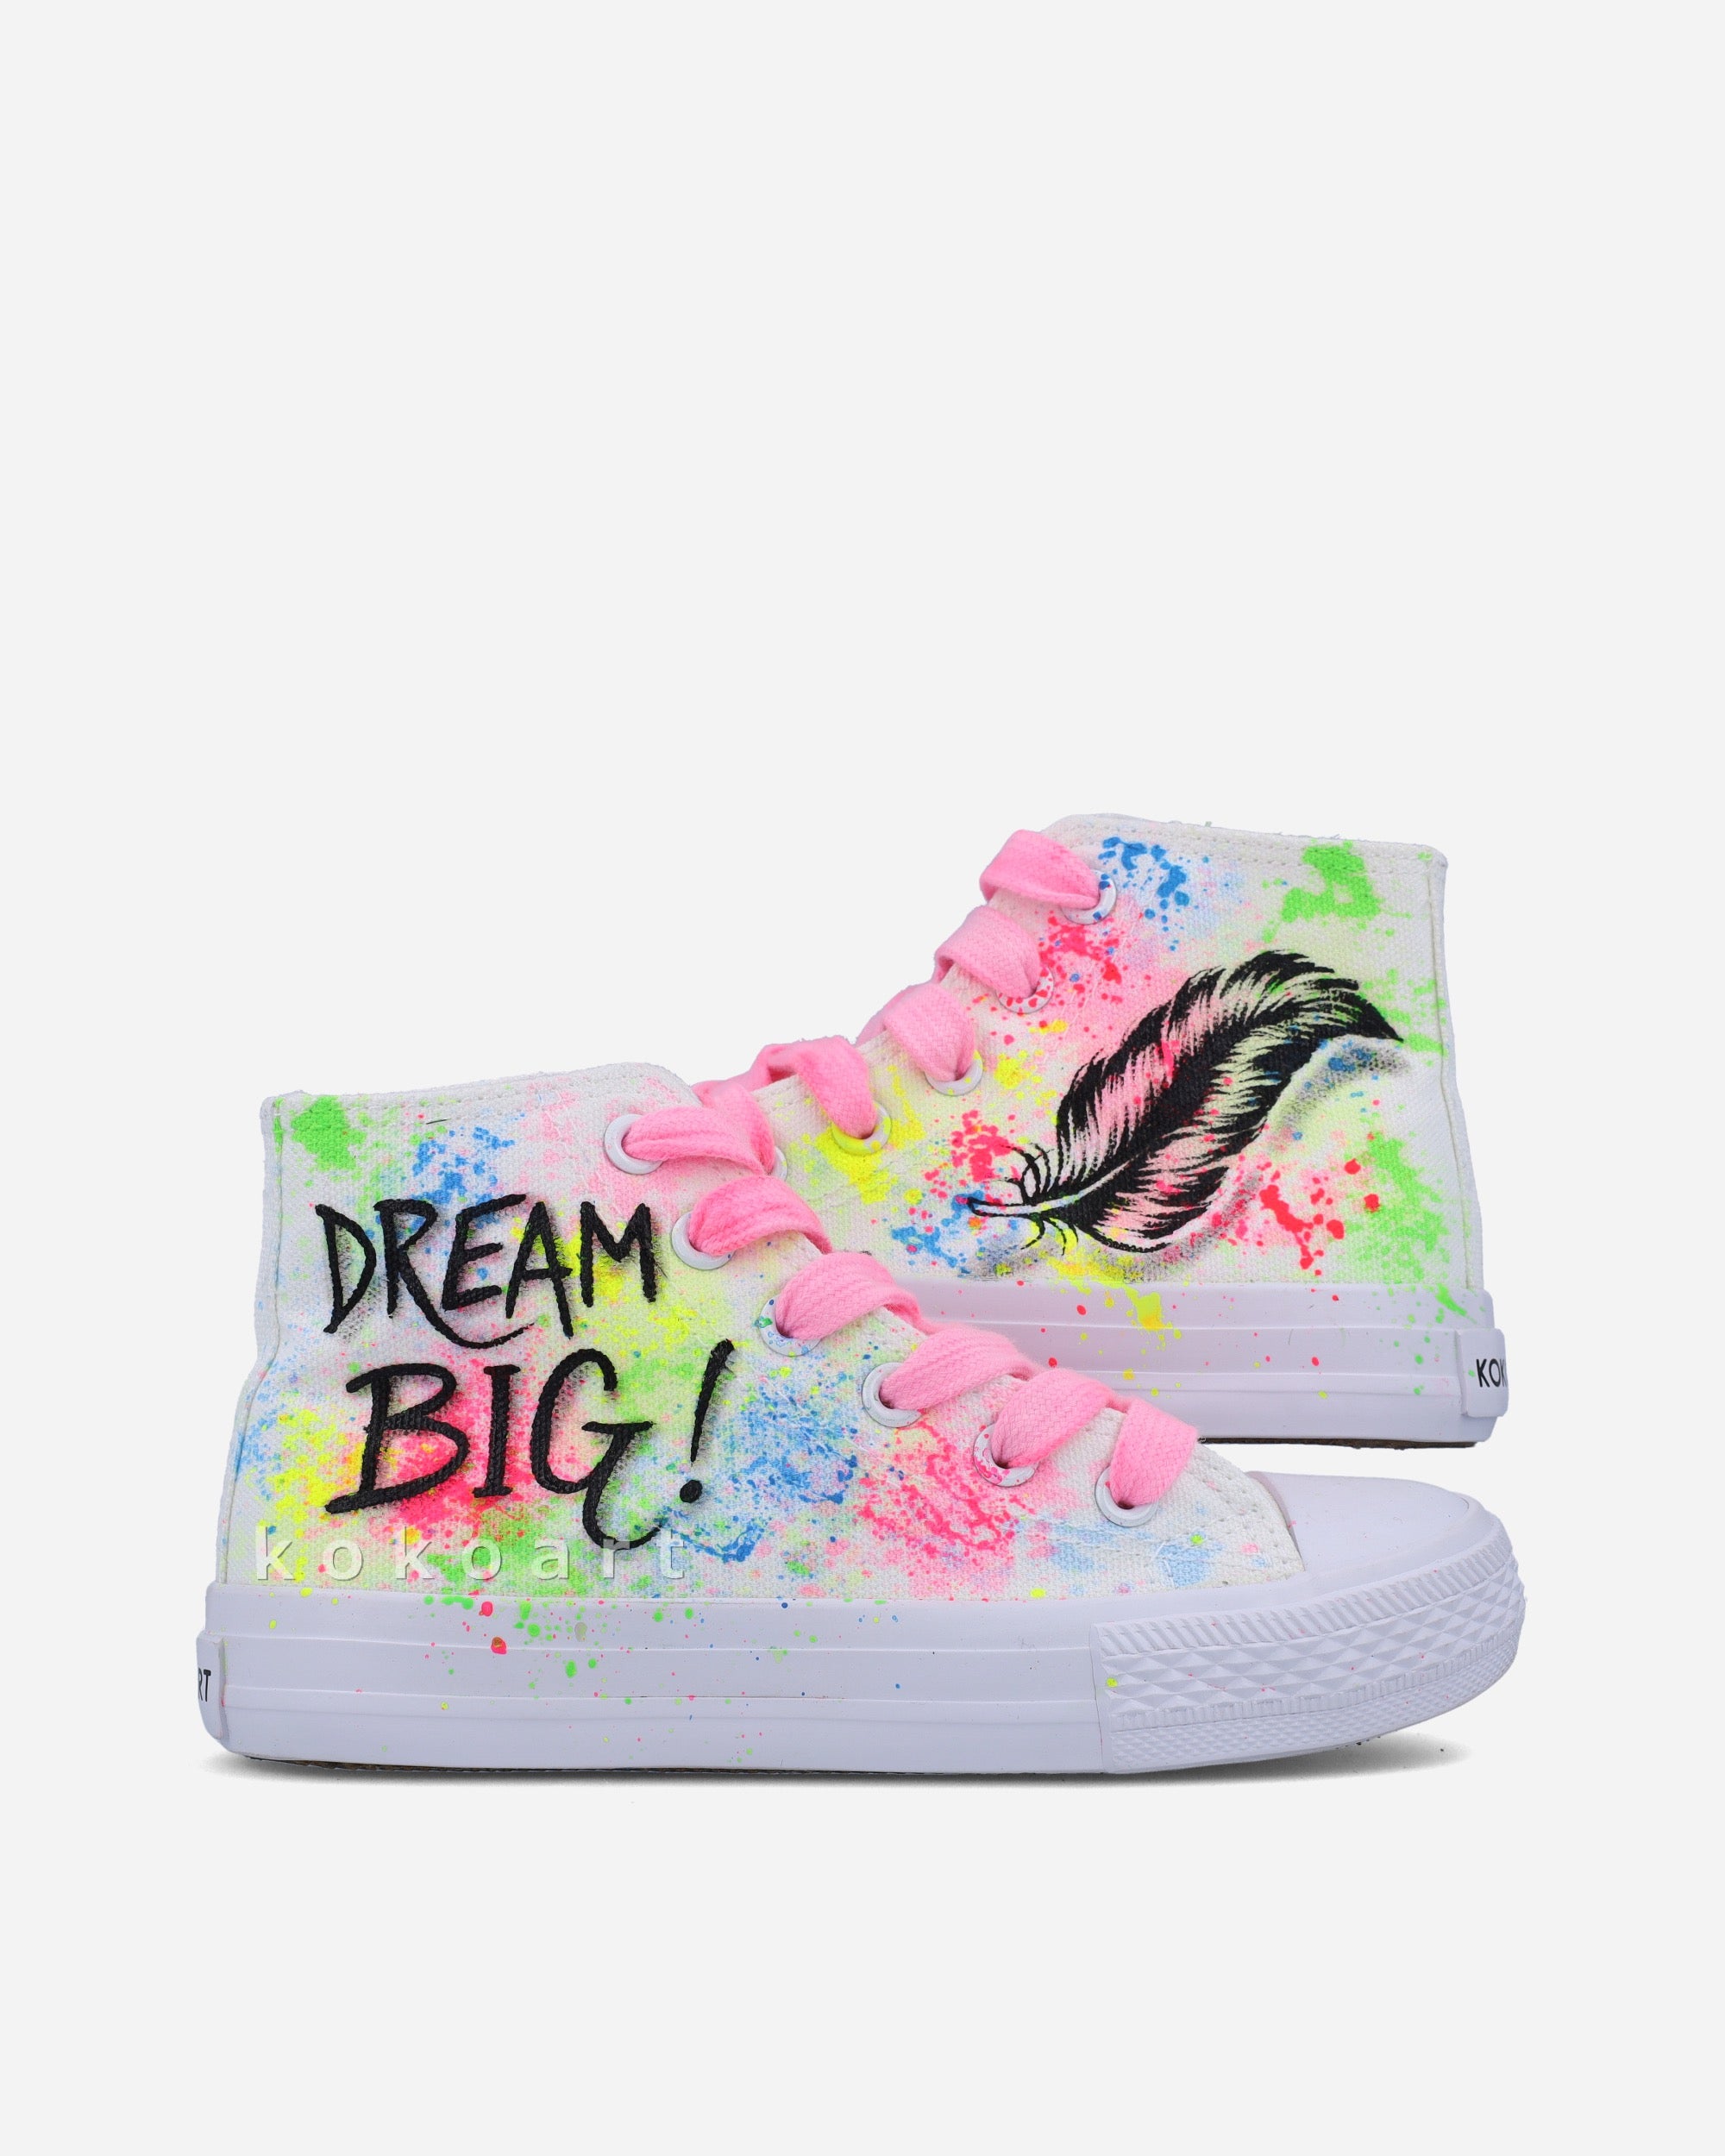 Dream Big Hand Painted Shoes